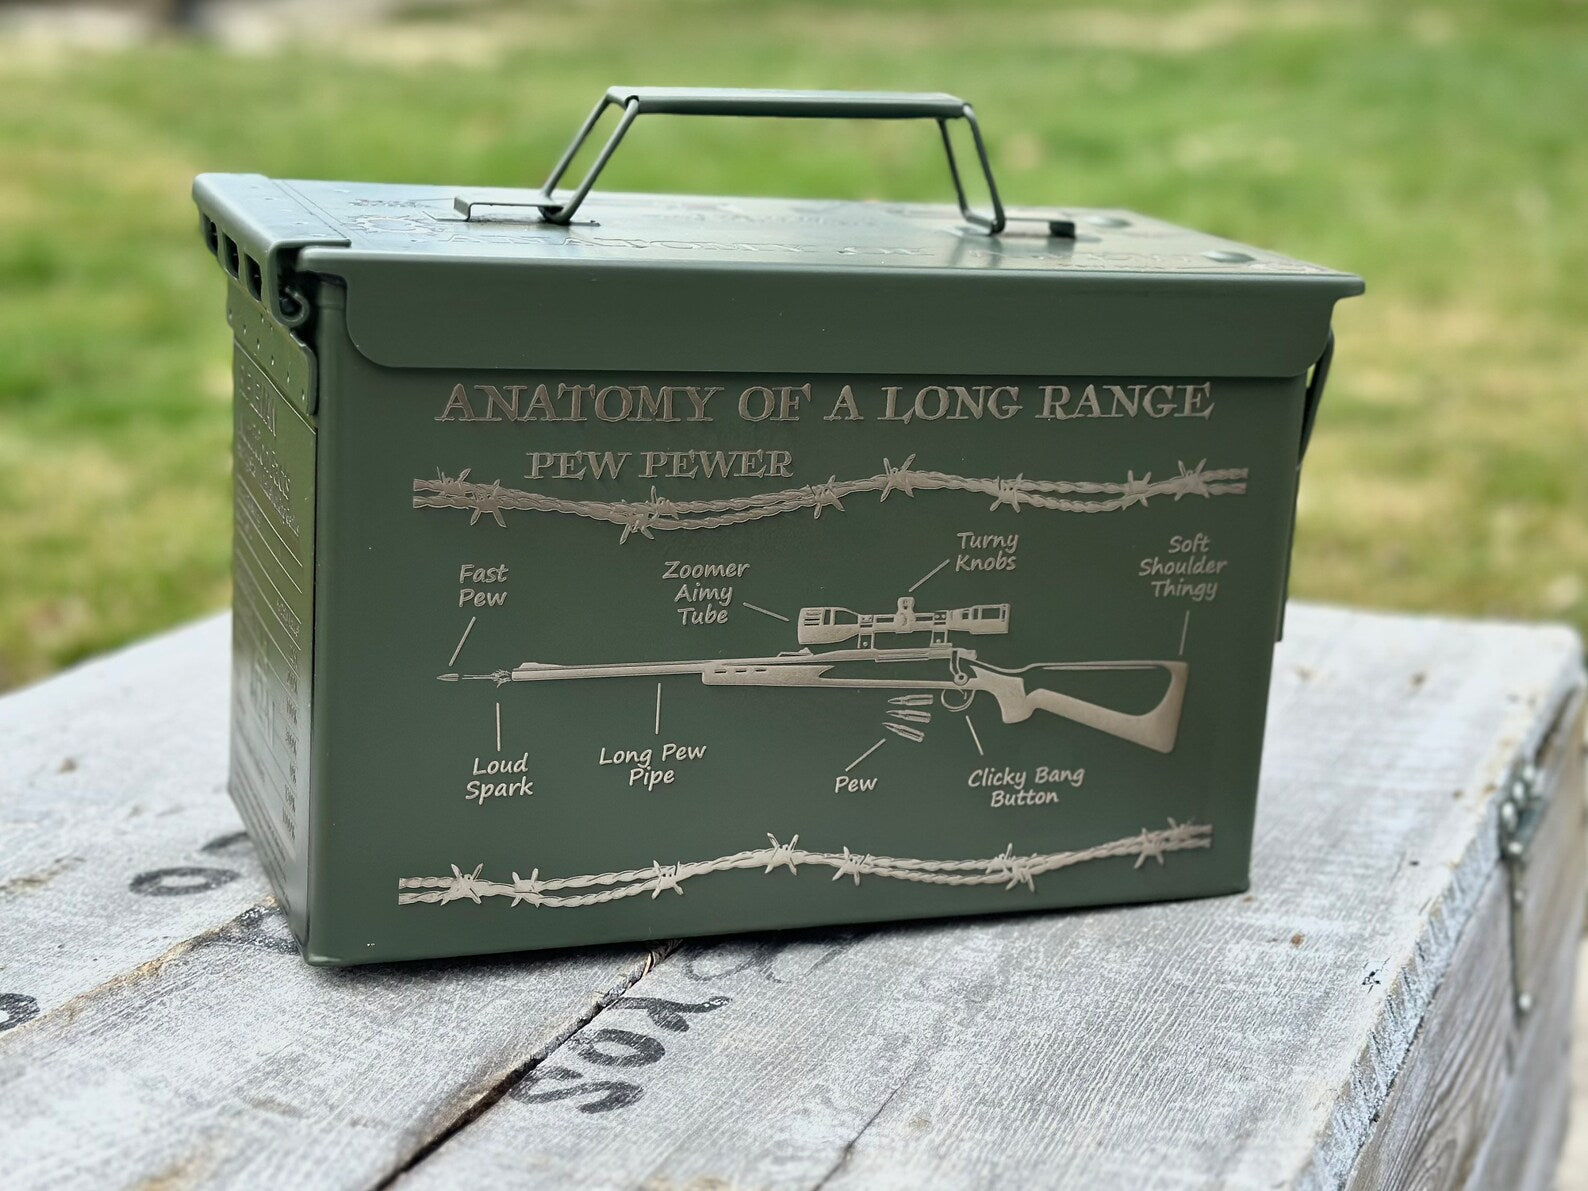 CUSTOM LASER ENGRAVED AMMO CANS